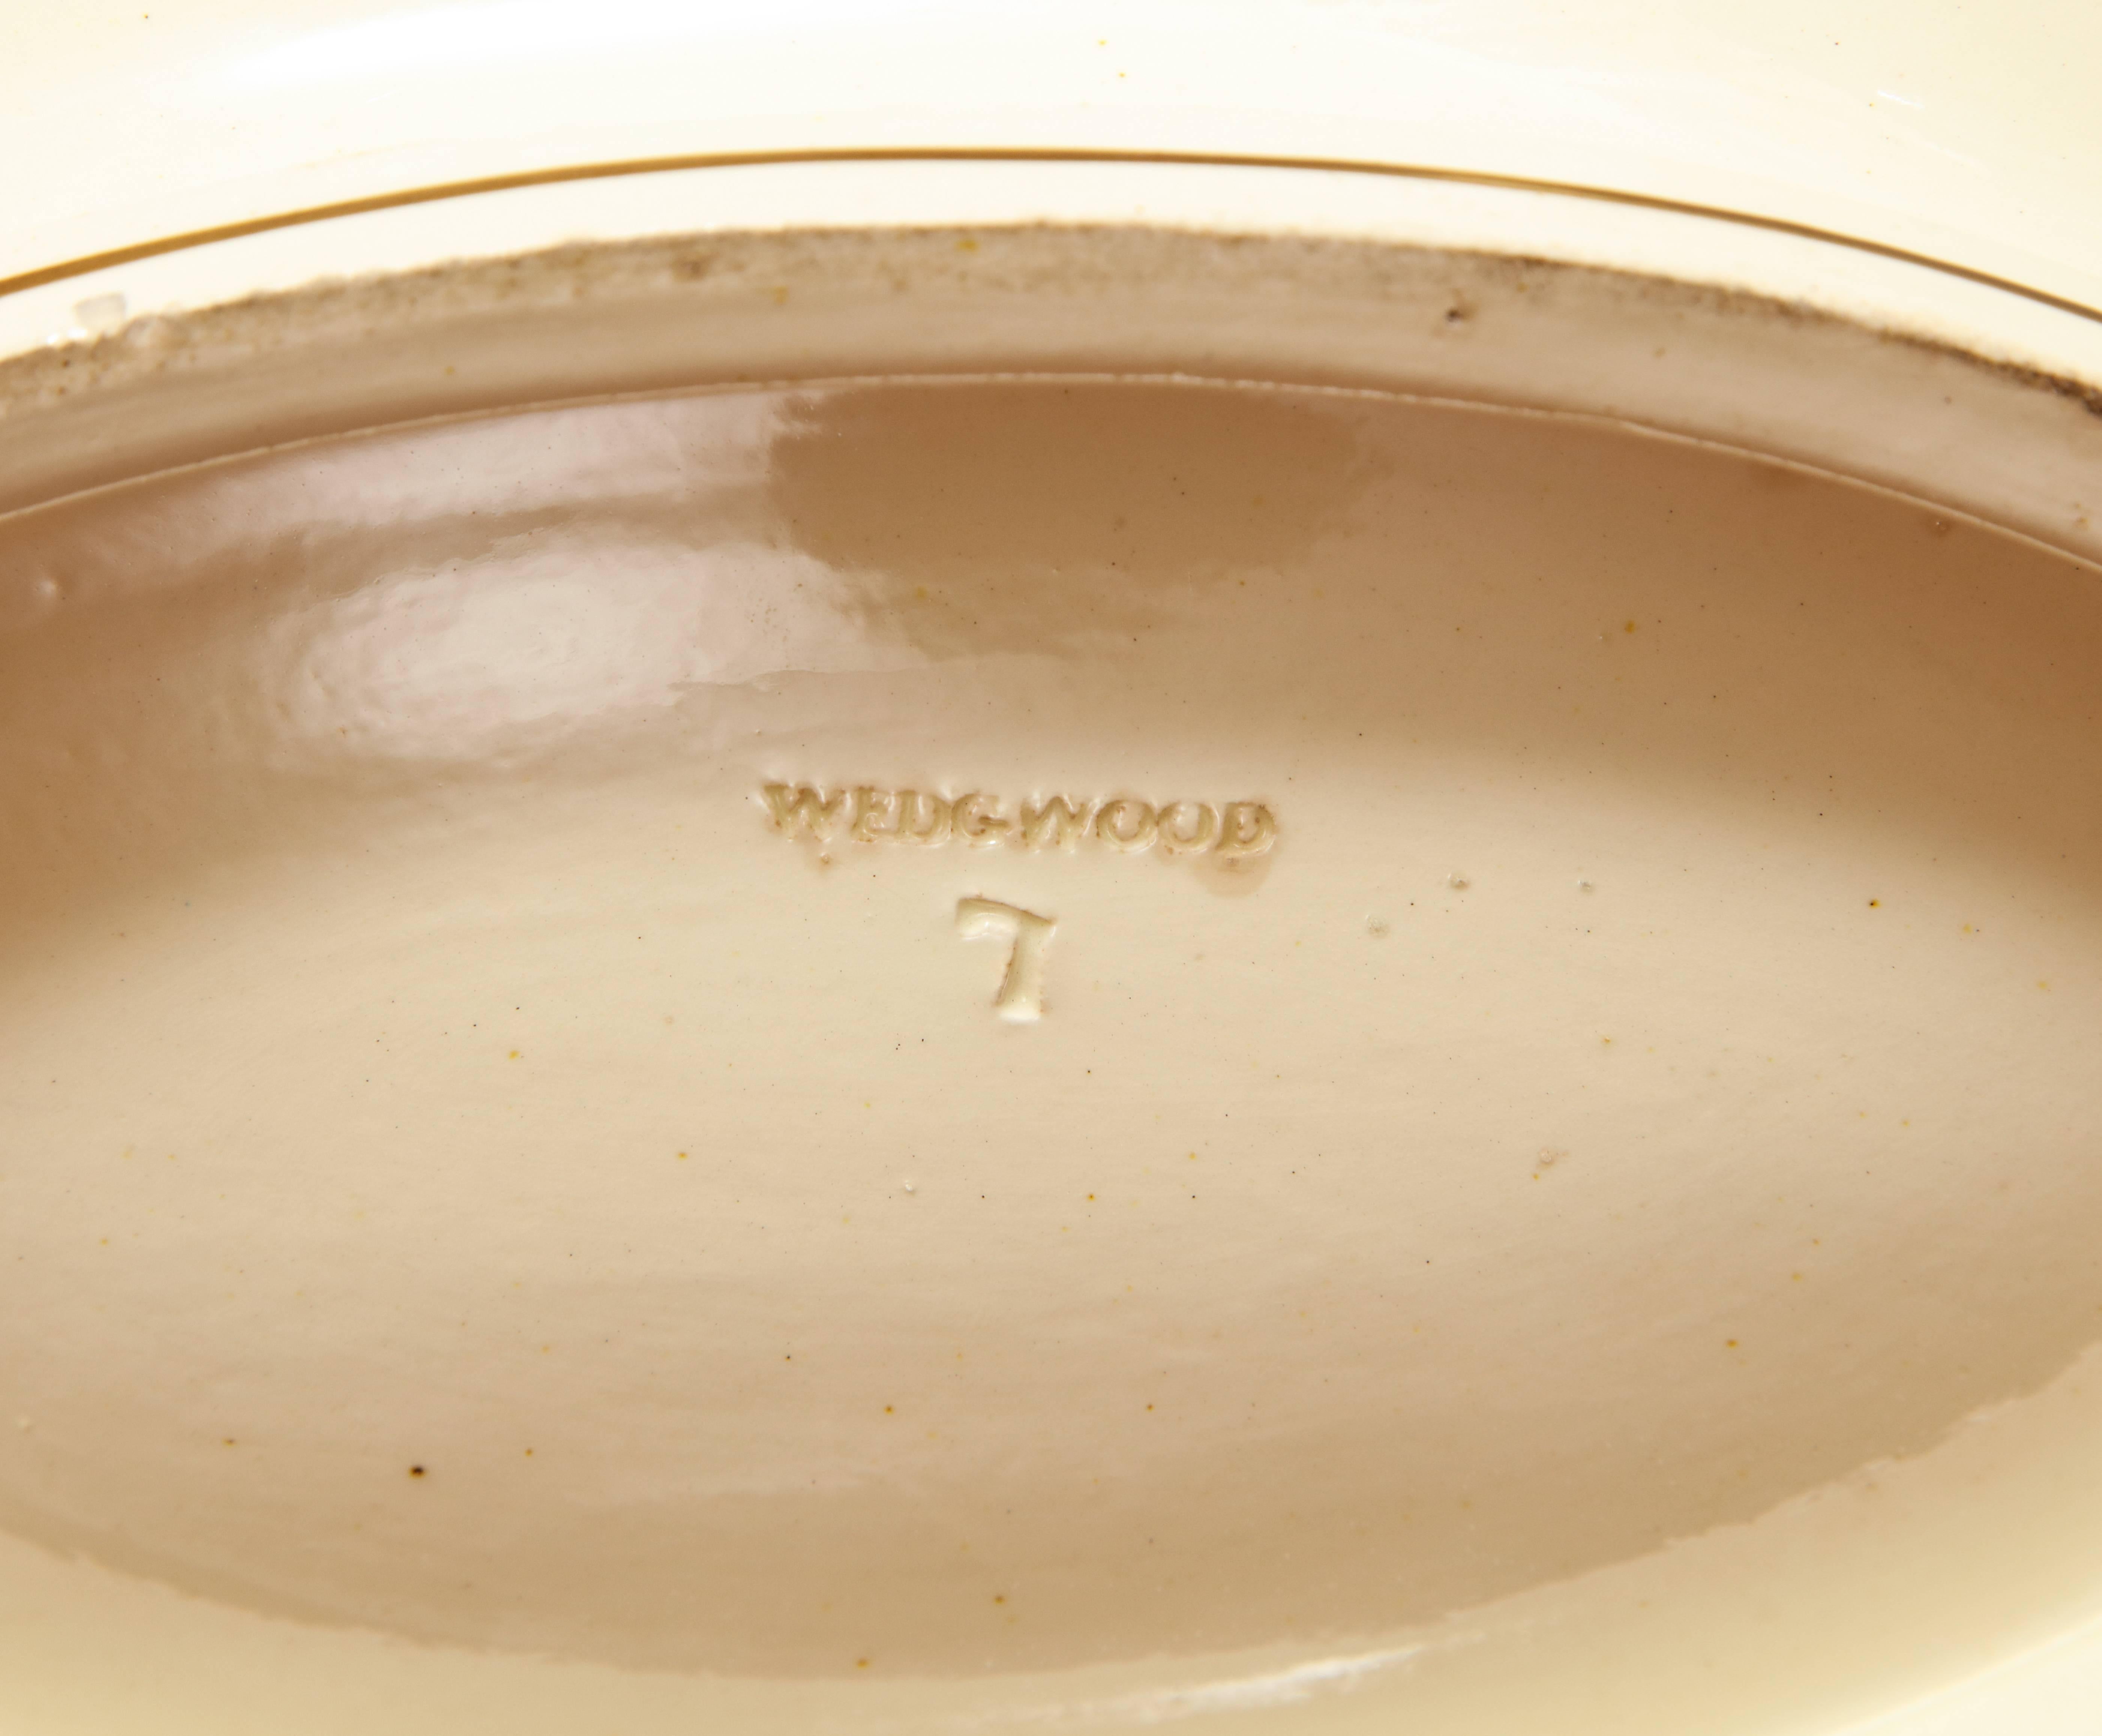 Ceramic Wedgwood Creamware Covered Tureen with Ivy Decoration